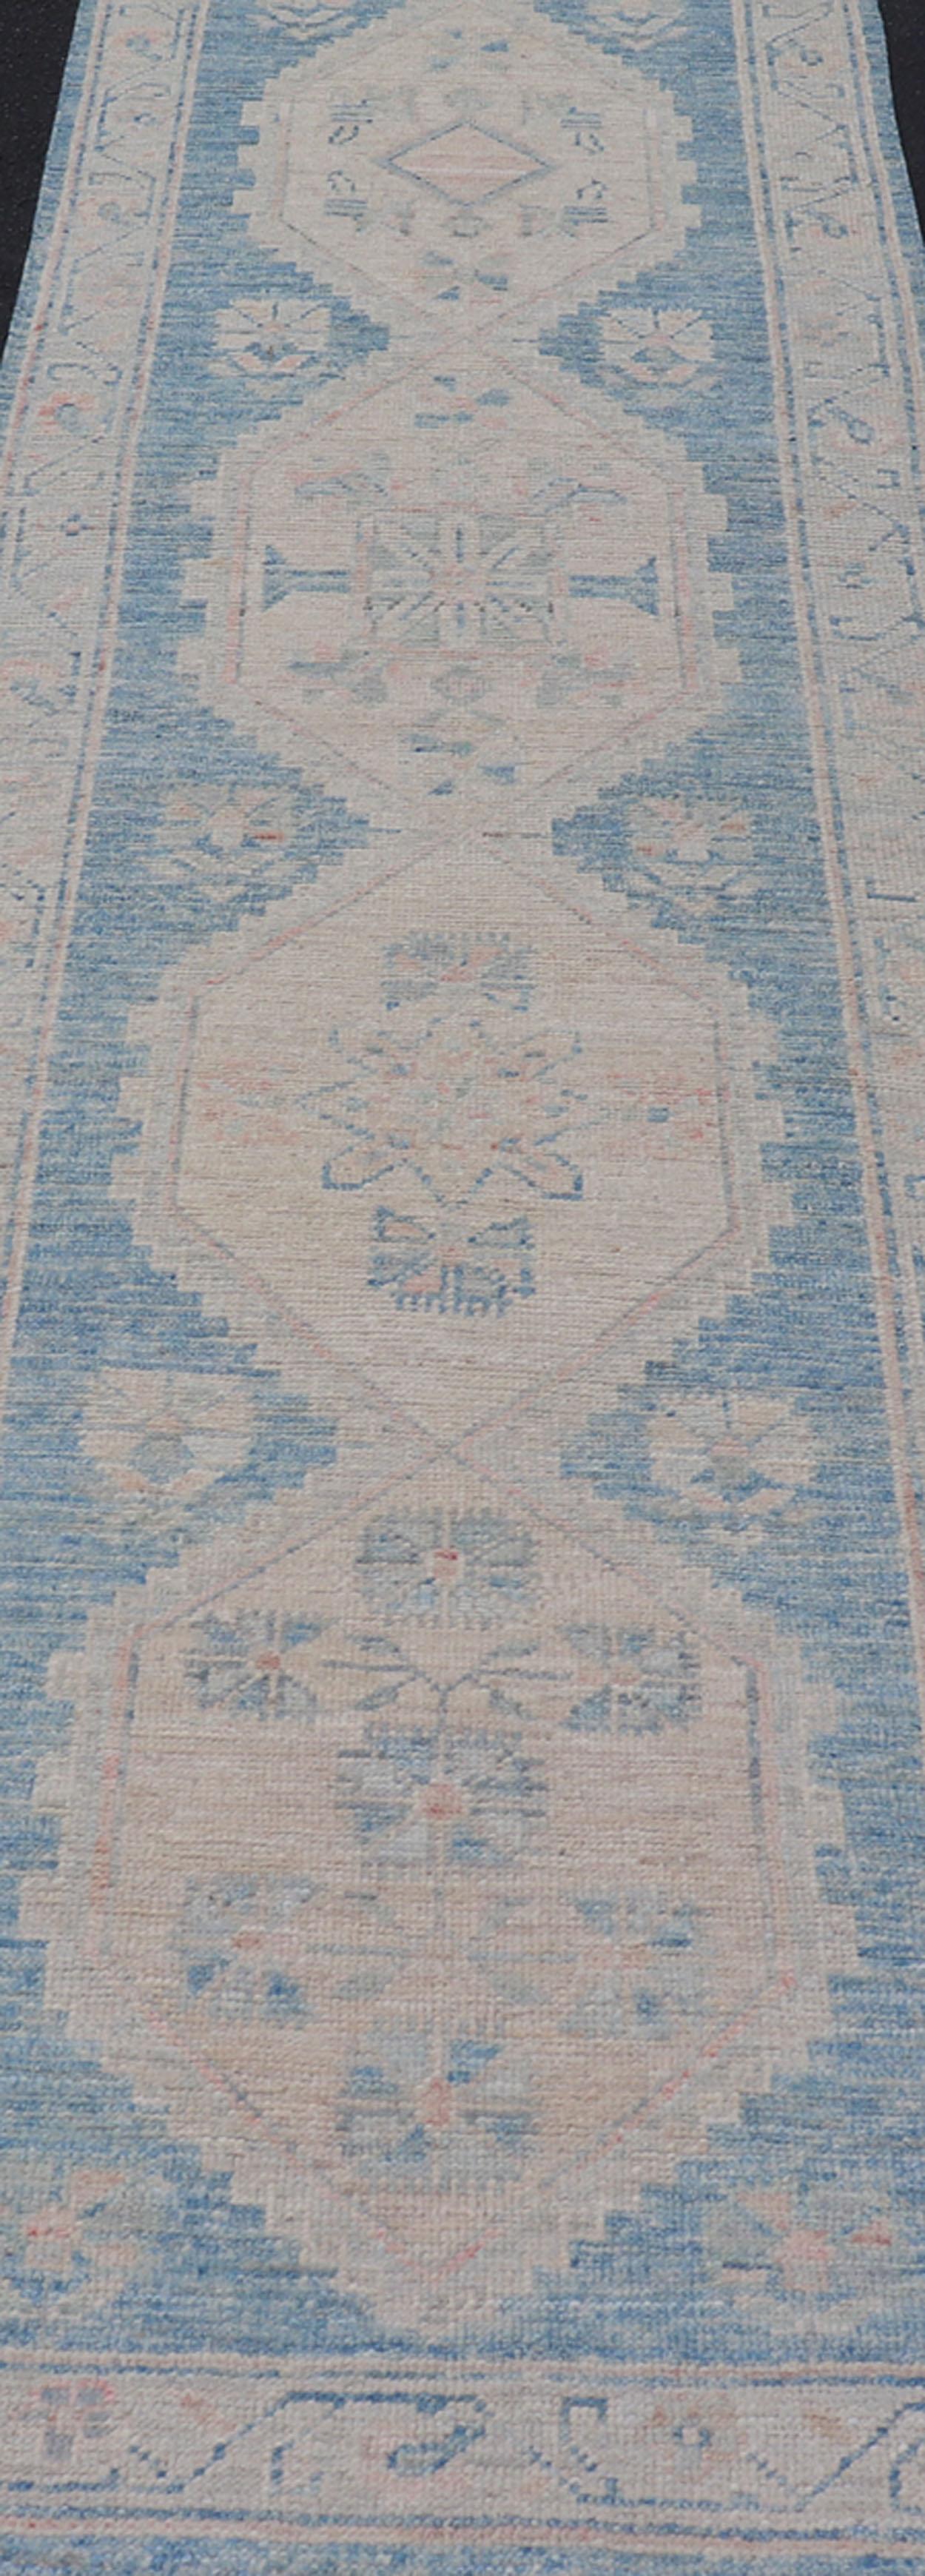 Hand-Knotted Oushak Modern Runner with Medallion Design In Shades of Blue and Cream For Sale